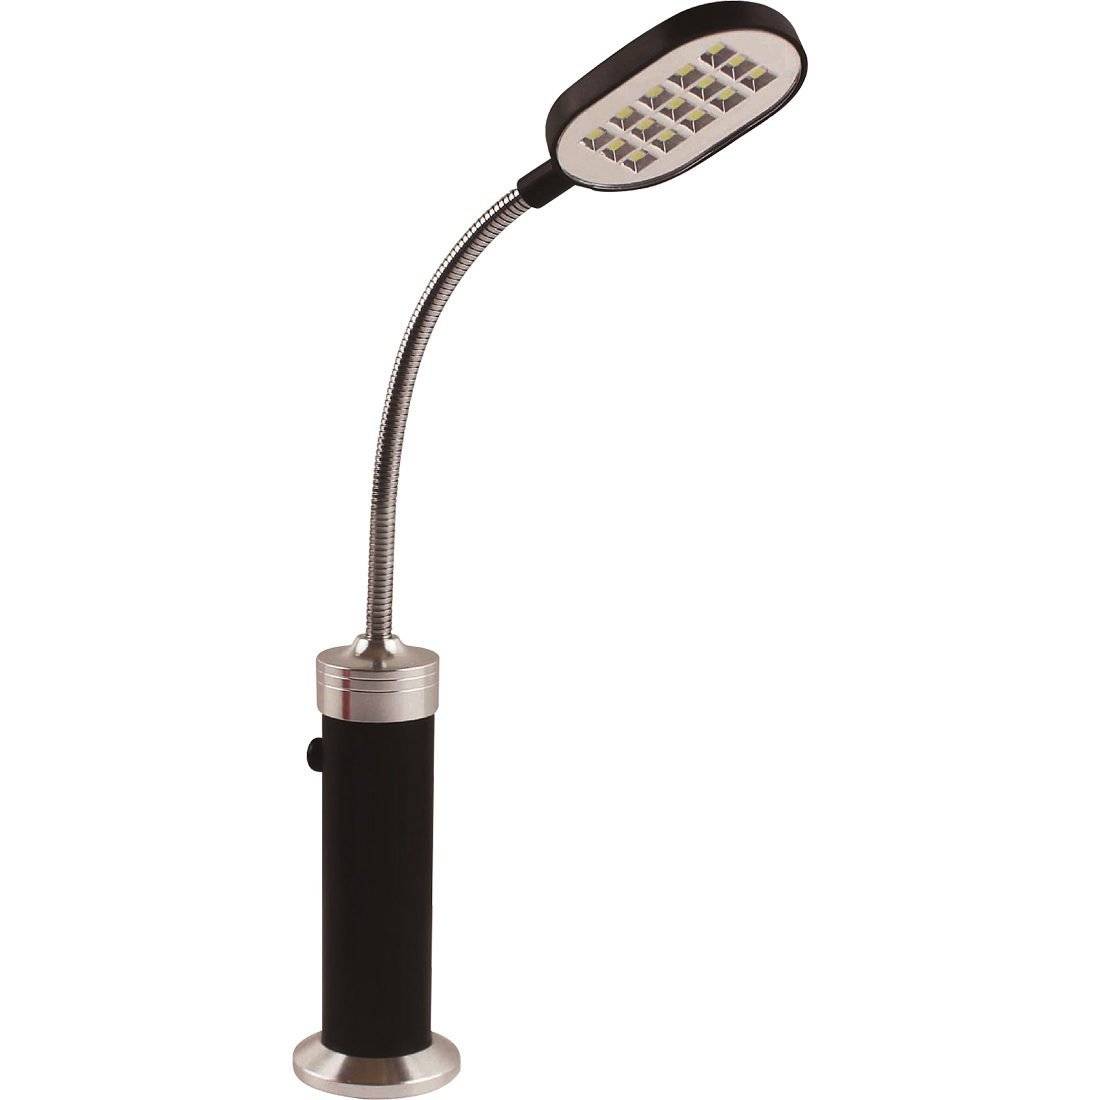 Outset Rotating Grill Light